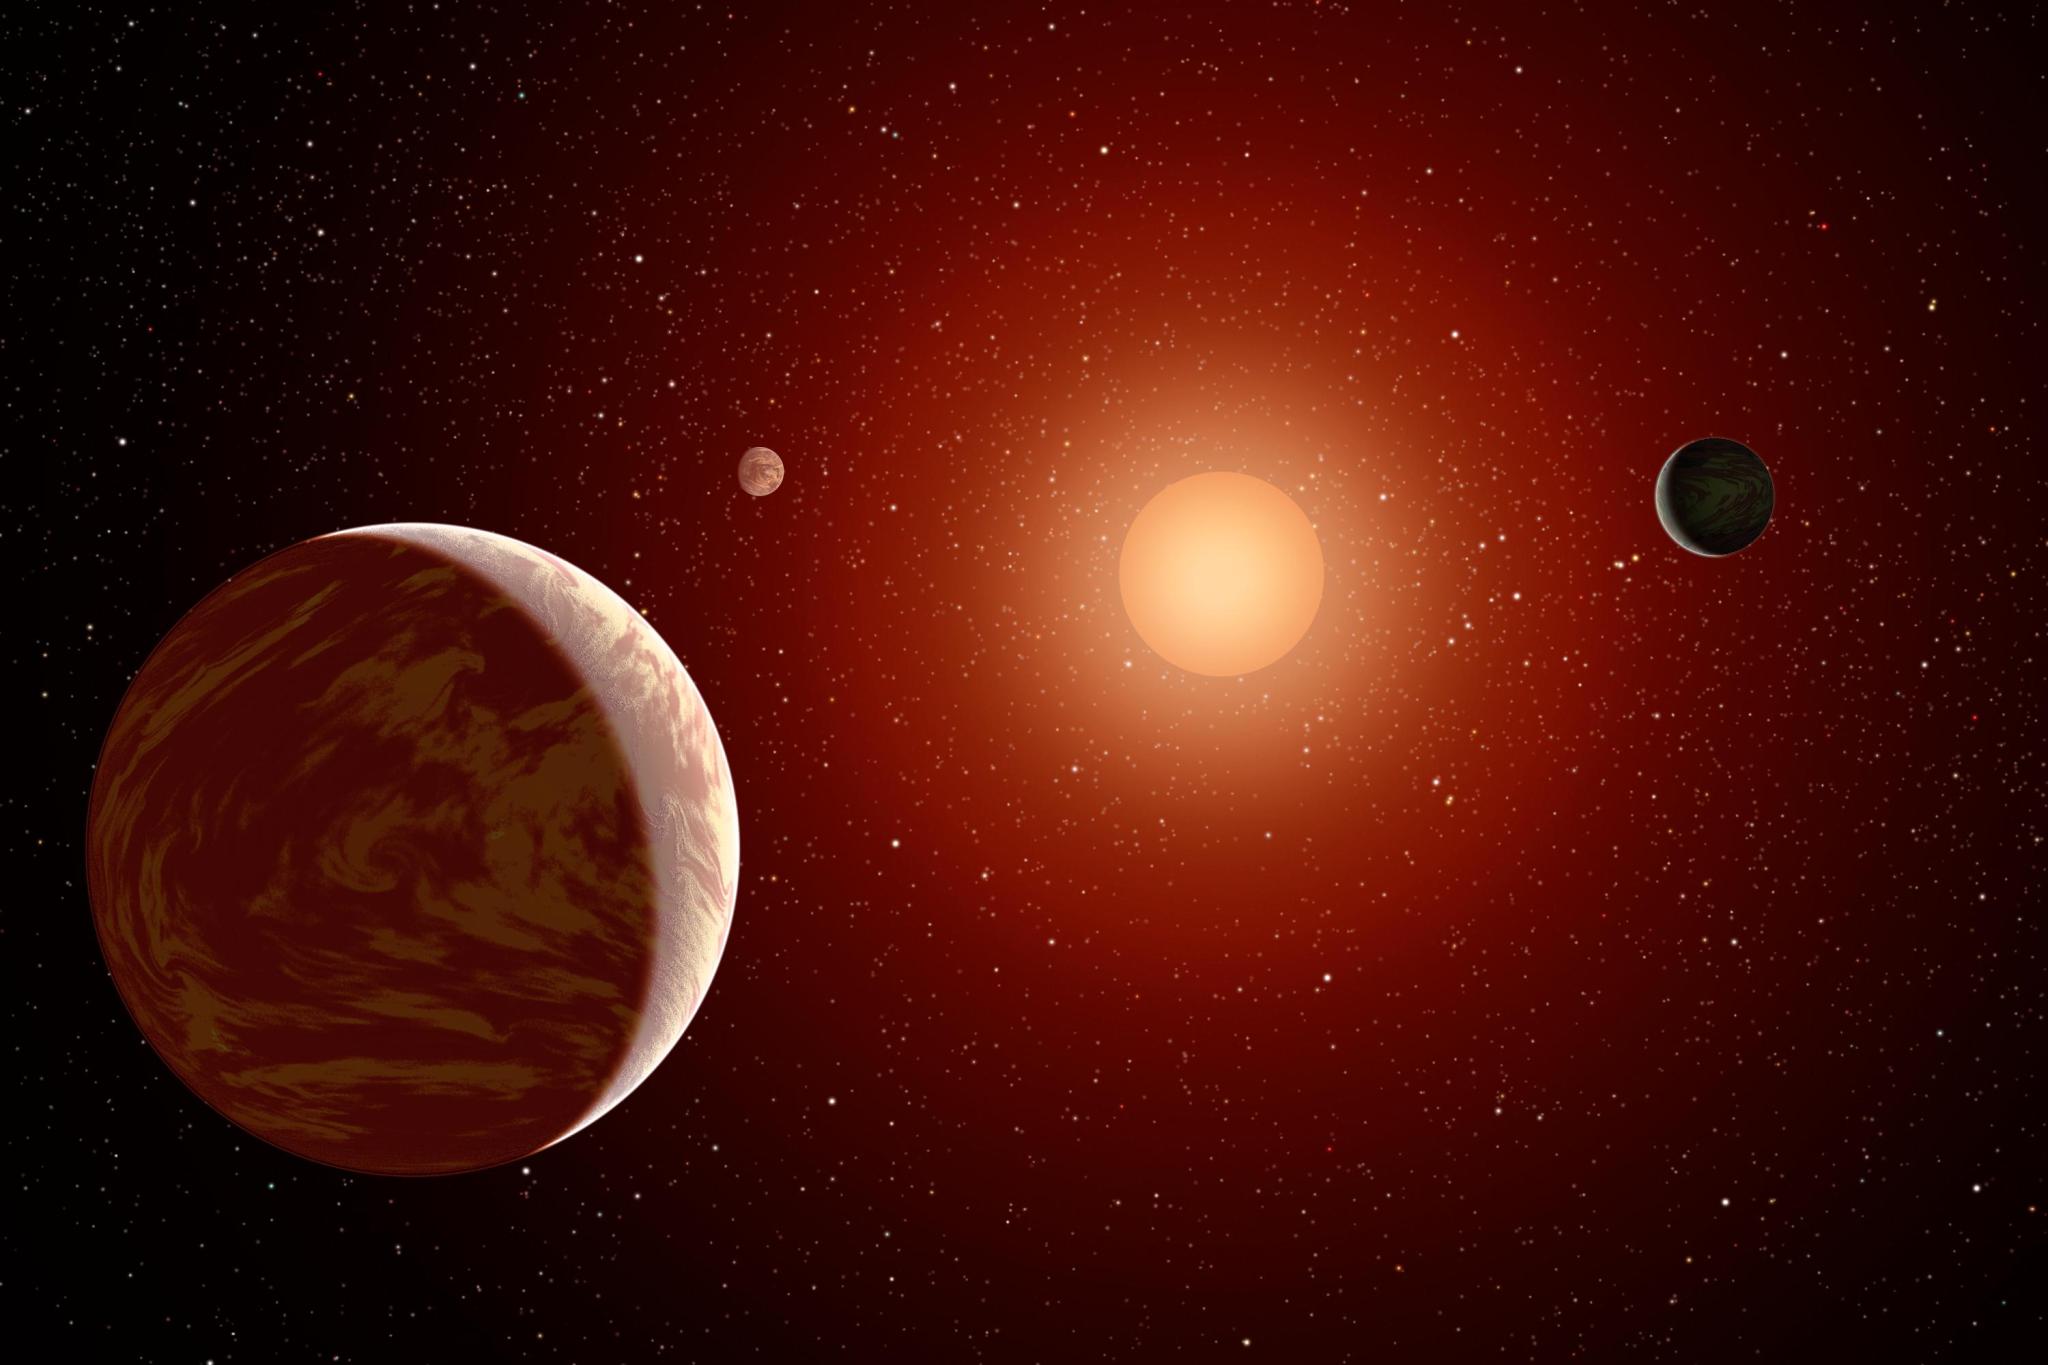 Artist's concept of an M star with planets